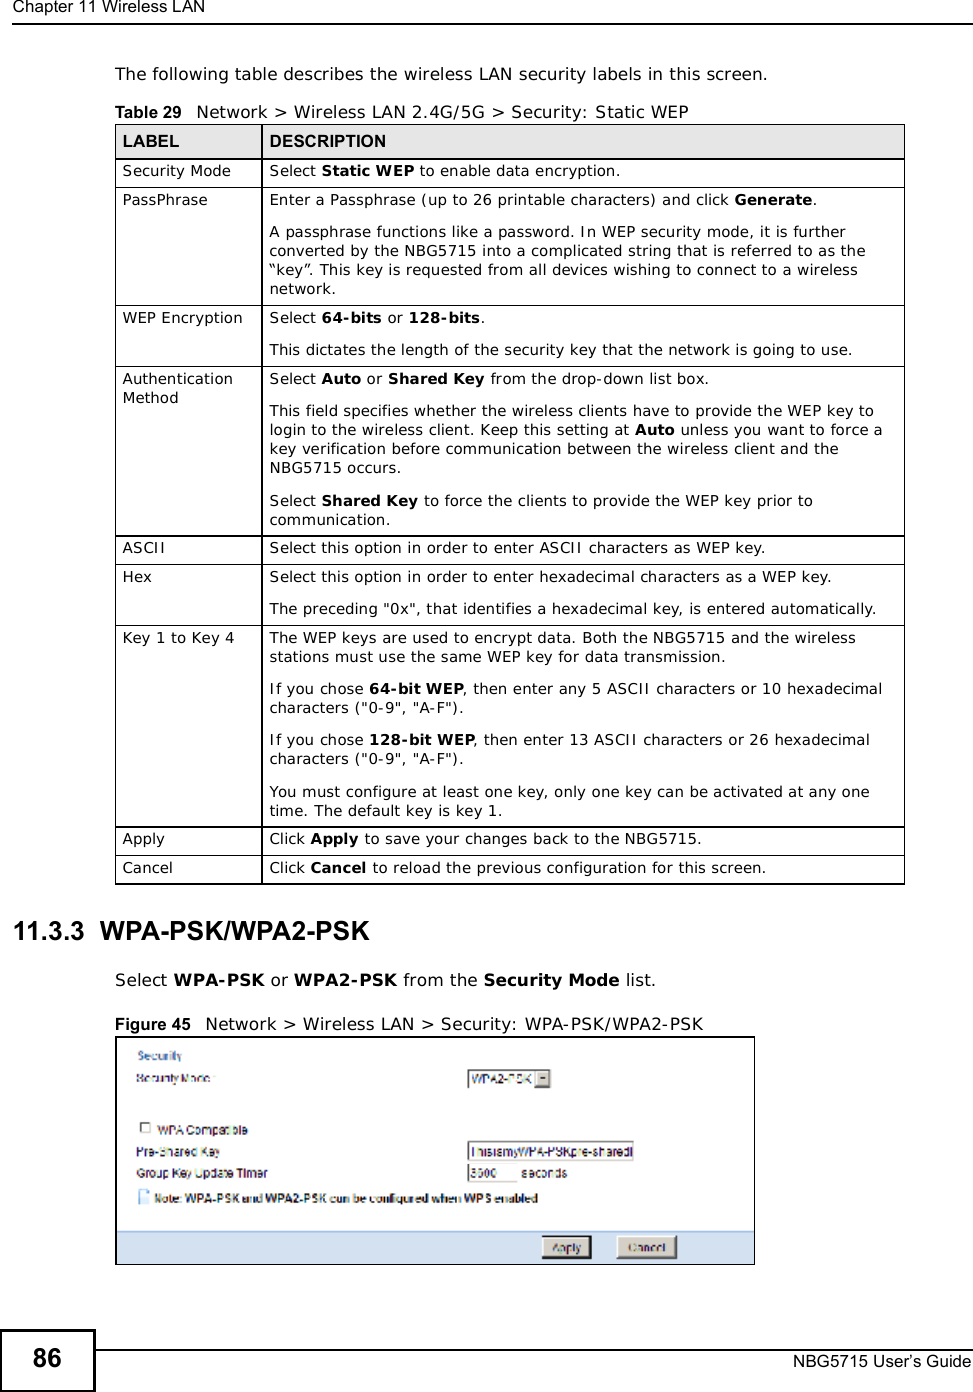 Chapter 11Wireless LANNBG5715 User’s Guide86The following table describes the wireless LAN security labels in this screen.11.3.3  WPA-PSK/WPA2-PSKSelect WPA-PSK or WPA2-PSK from the Security Mode list.Figure 45   Network &gt; Wireless LAN &gt; Security: WPA-PSK/WPA2-PSKTable 29   Network &gt; Wireless LAN 2.4G/5G &gt; Security: Static WEPLABEL DESCRIPTIONSecurity Mode Select Static WEP to enable data encryption.PassPhrase Enter a Passphrase (up to 26 printable characters) and click Generate.A passphrase functions like a password. In WEP security mode, it is further converted by the NBG5715 into a complicated string that is referred to as the “key”. This key is requested from all devices wishing to connect to a wireless network.WEP Encryption Select 64-bits or 128-bits.This dictates the length of the security key that the network is going to use.Authentication Method Select Auto or Shared Key from the drop-down list box.This field specifies whether the wireless clients have to provide the WEP key to login to the wireless client. Keep this setting at Auto unless you want to force a key verification before communication between the wireless client and the NBG5715 occurs. Select Shared Key to force the clients to provide the WEP key prior to communication. ASCII Select this option in order to enter ASCII characters as WEP key. Hex Select this option in order to enter hexadecimal characters as a WEP key. The preceding &quot;0x&quot;, that identifies a hexadecimal key, is entered automatically.Key 1 to Key 4 The WEP keys are used to encrypt data. Both the NBG5715 and the wireless stations must use the same WEP key for data transmission.If you chose 64-bit WEP, then enter any 5 ASCII characters or 10 hexadecimal characters (&quot;0-9&quot;, &quot;A-F&quot;).If you chose 128-bit WEP, then enter 13 ASCII characters or 26 hexadecimal characters (&quot;0-9&quot;, &quot;A-F&quot;). You must configure at least one key, only one key can be activated at any one time. The default key is key 1.Apply Click Apply to save your changes back to the NBG5715.Cancel Click Cancel to reload the previous configuration for this screen.